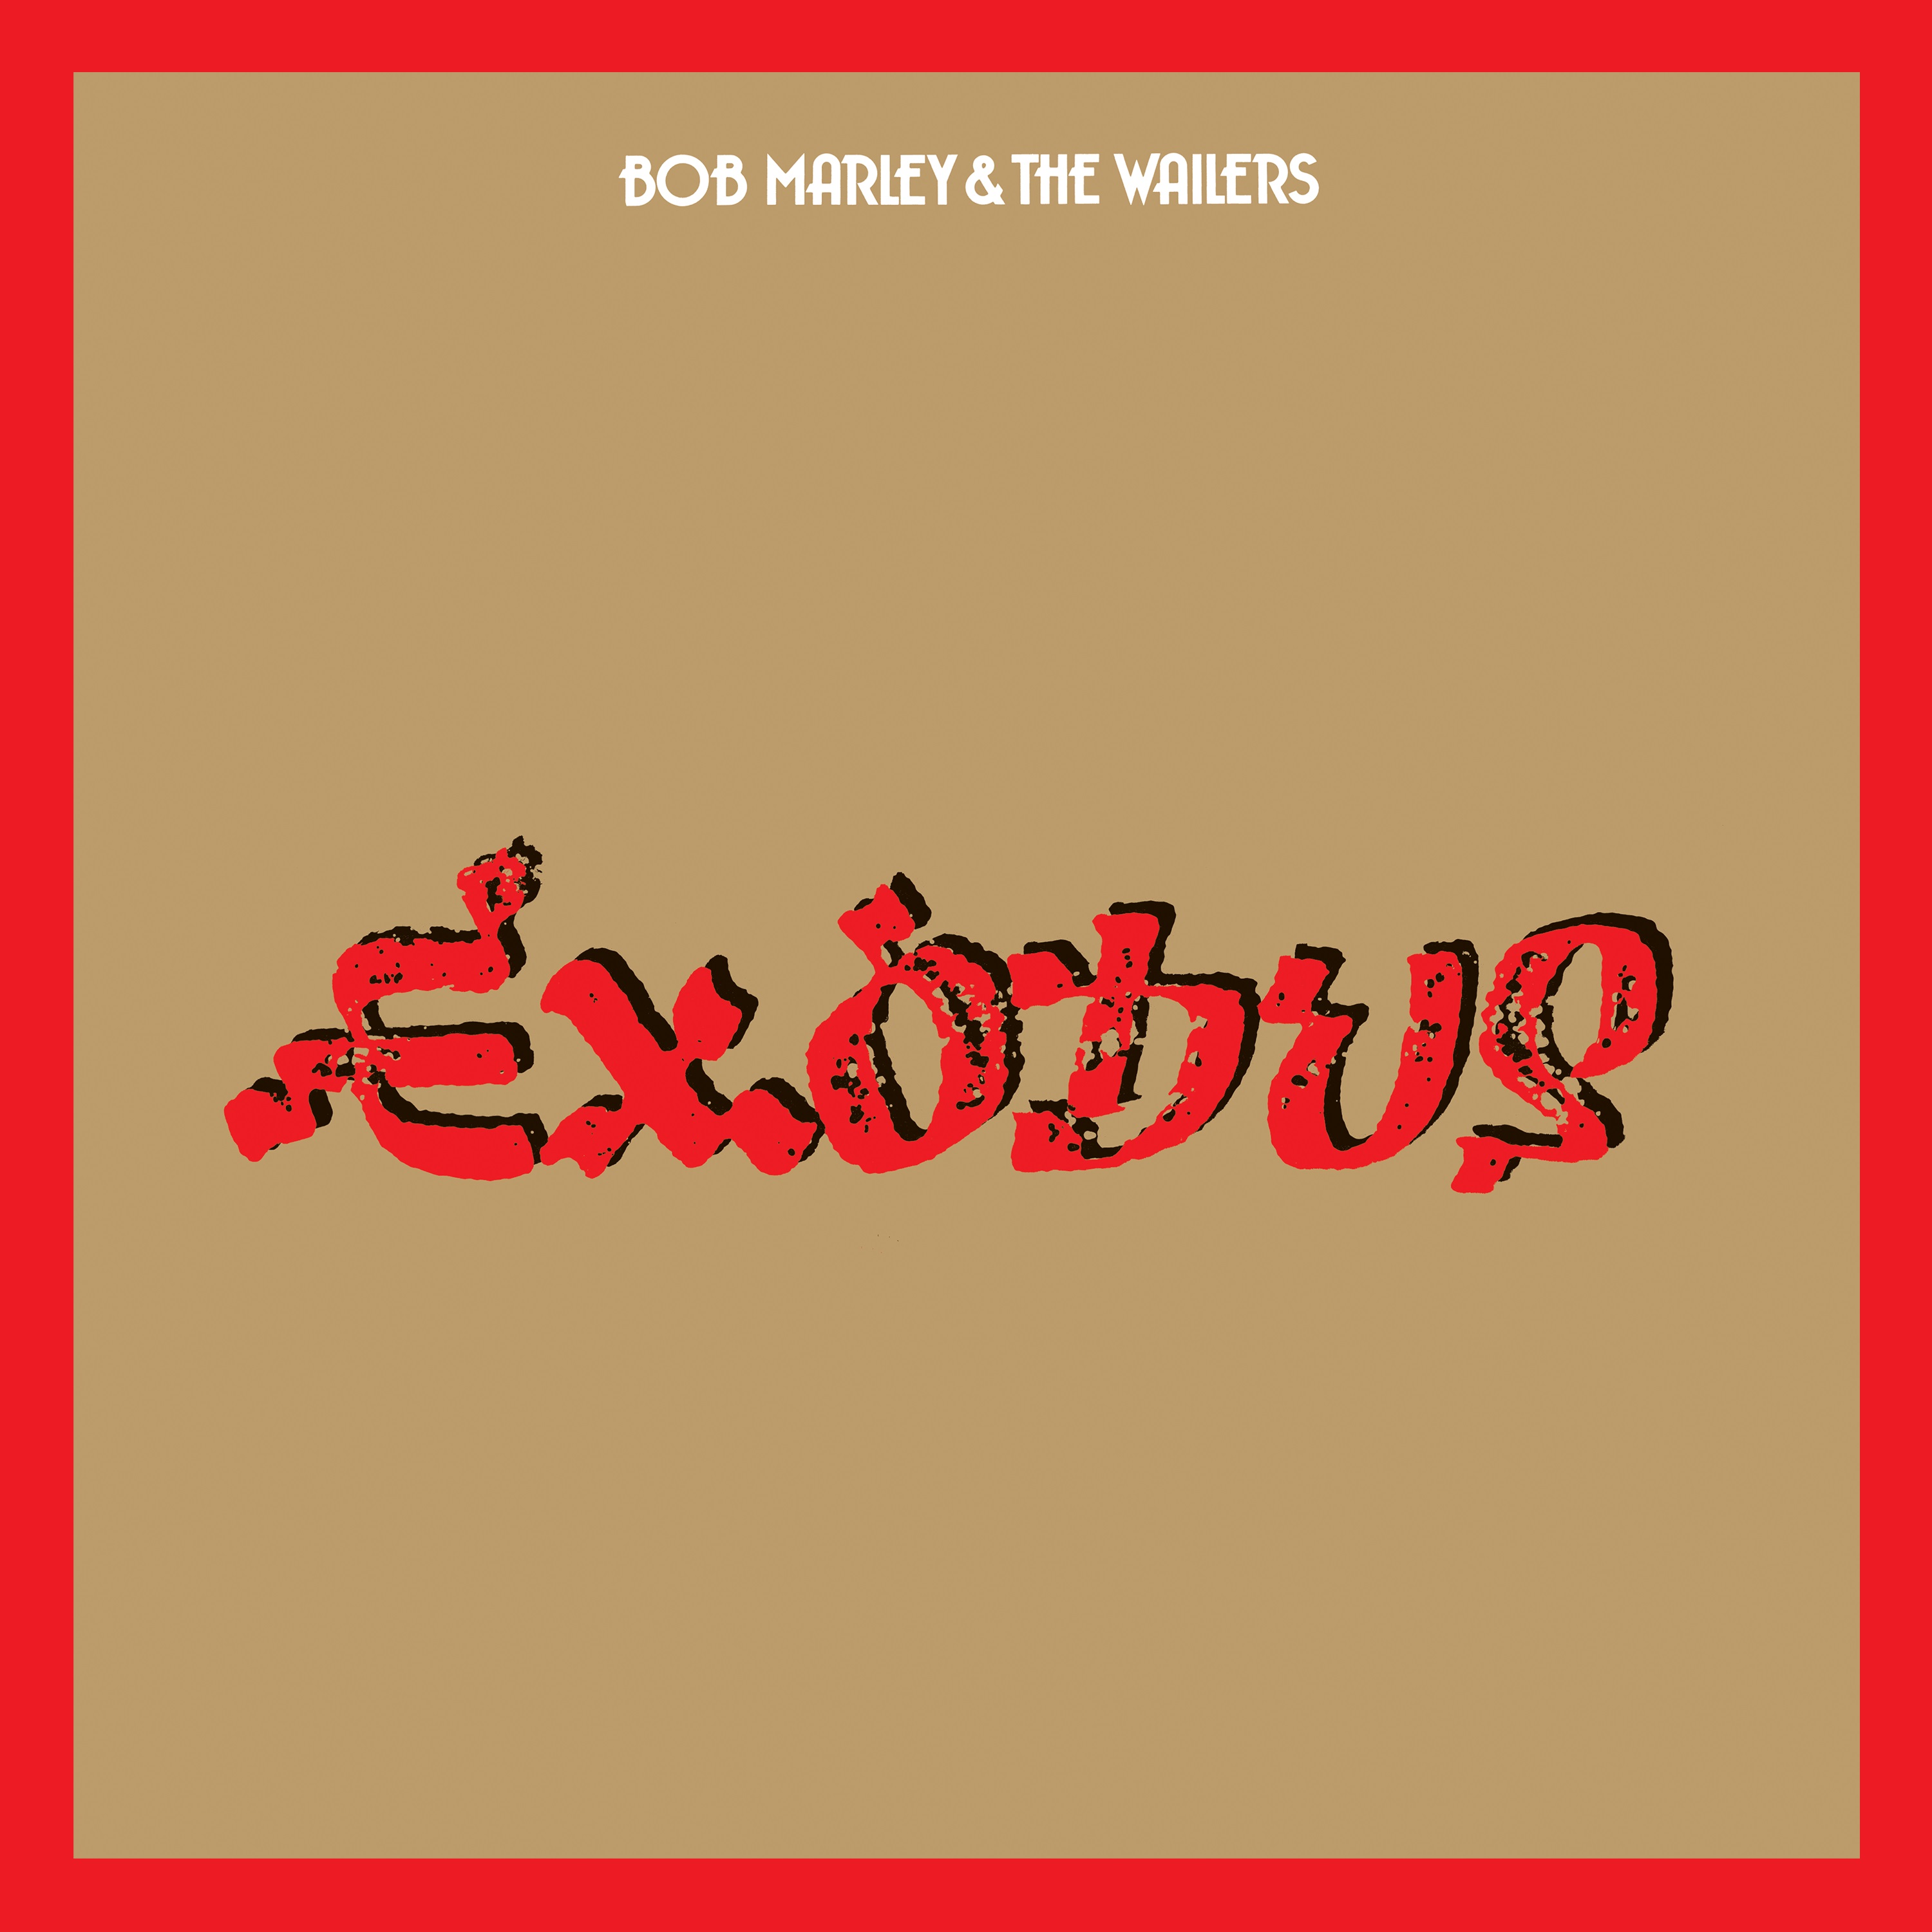 THE MARLEY FAMILY, ISLAND RECORDS, AND UMe CELEBRATES THE 45TH ANNIVERSARY OF BOB MARLEY & THE WAILERS EXODUS WITH A SERIES OF DIGITAL RELEASES